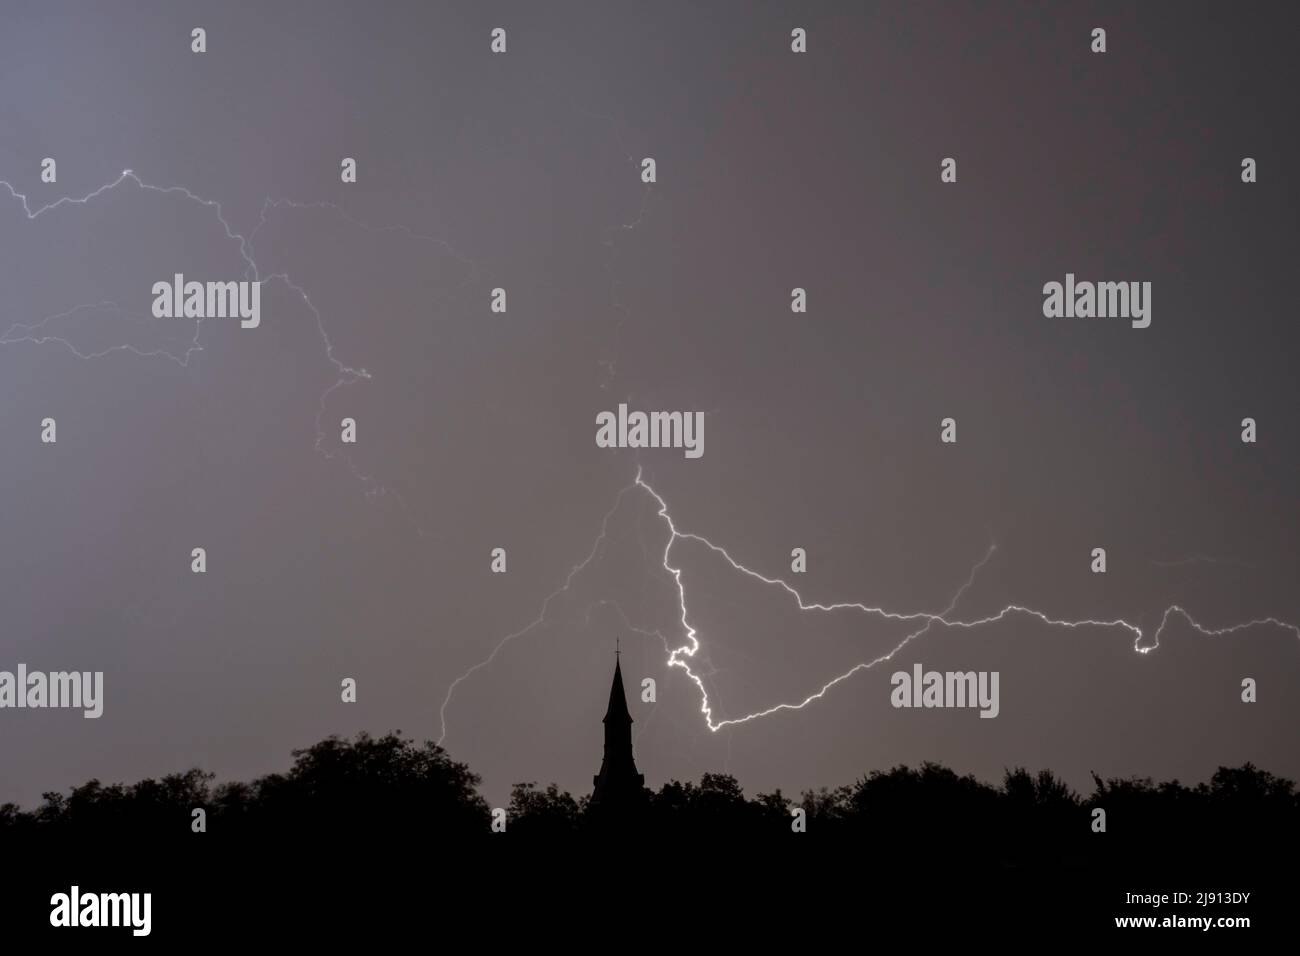 Rain falling and stroke of forked lightning during thunderstorm at night over church tower and trees Stock Photo